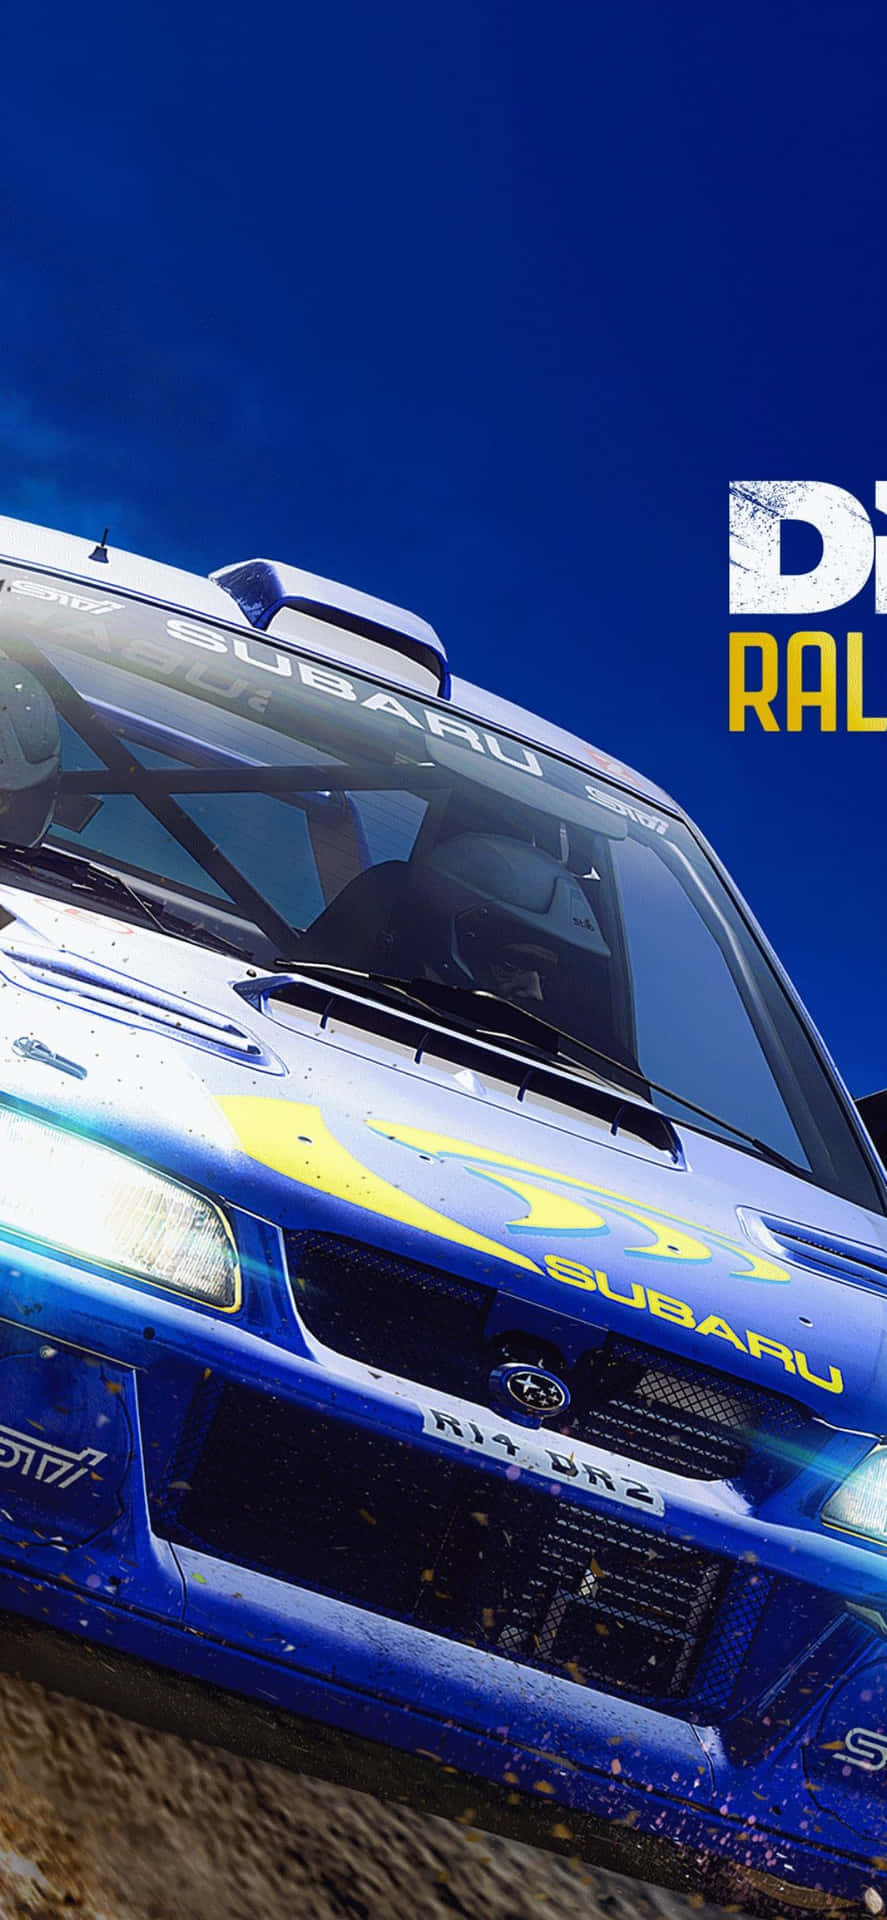 Experience the thrills of Dirt Rally on your Iphone X